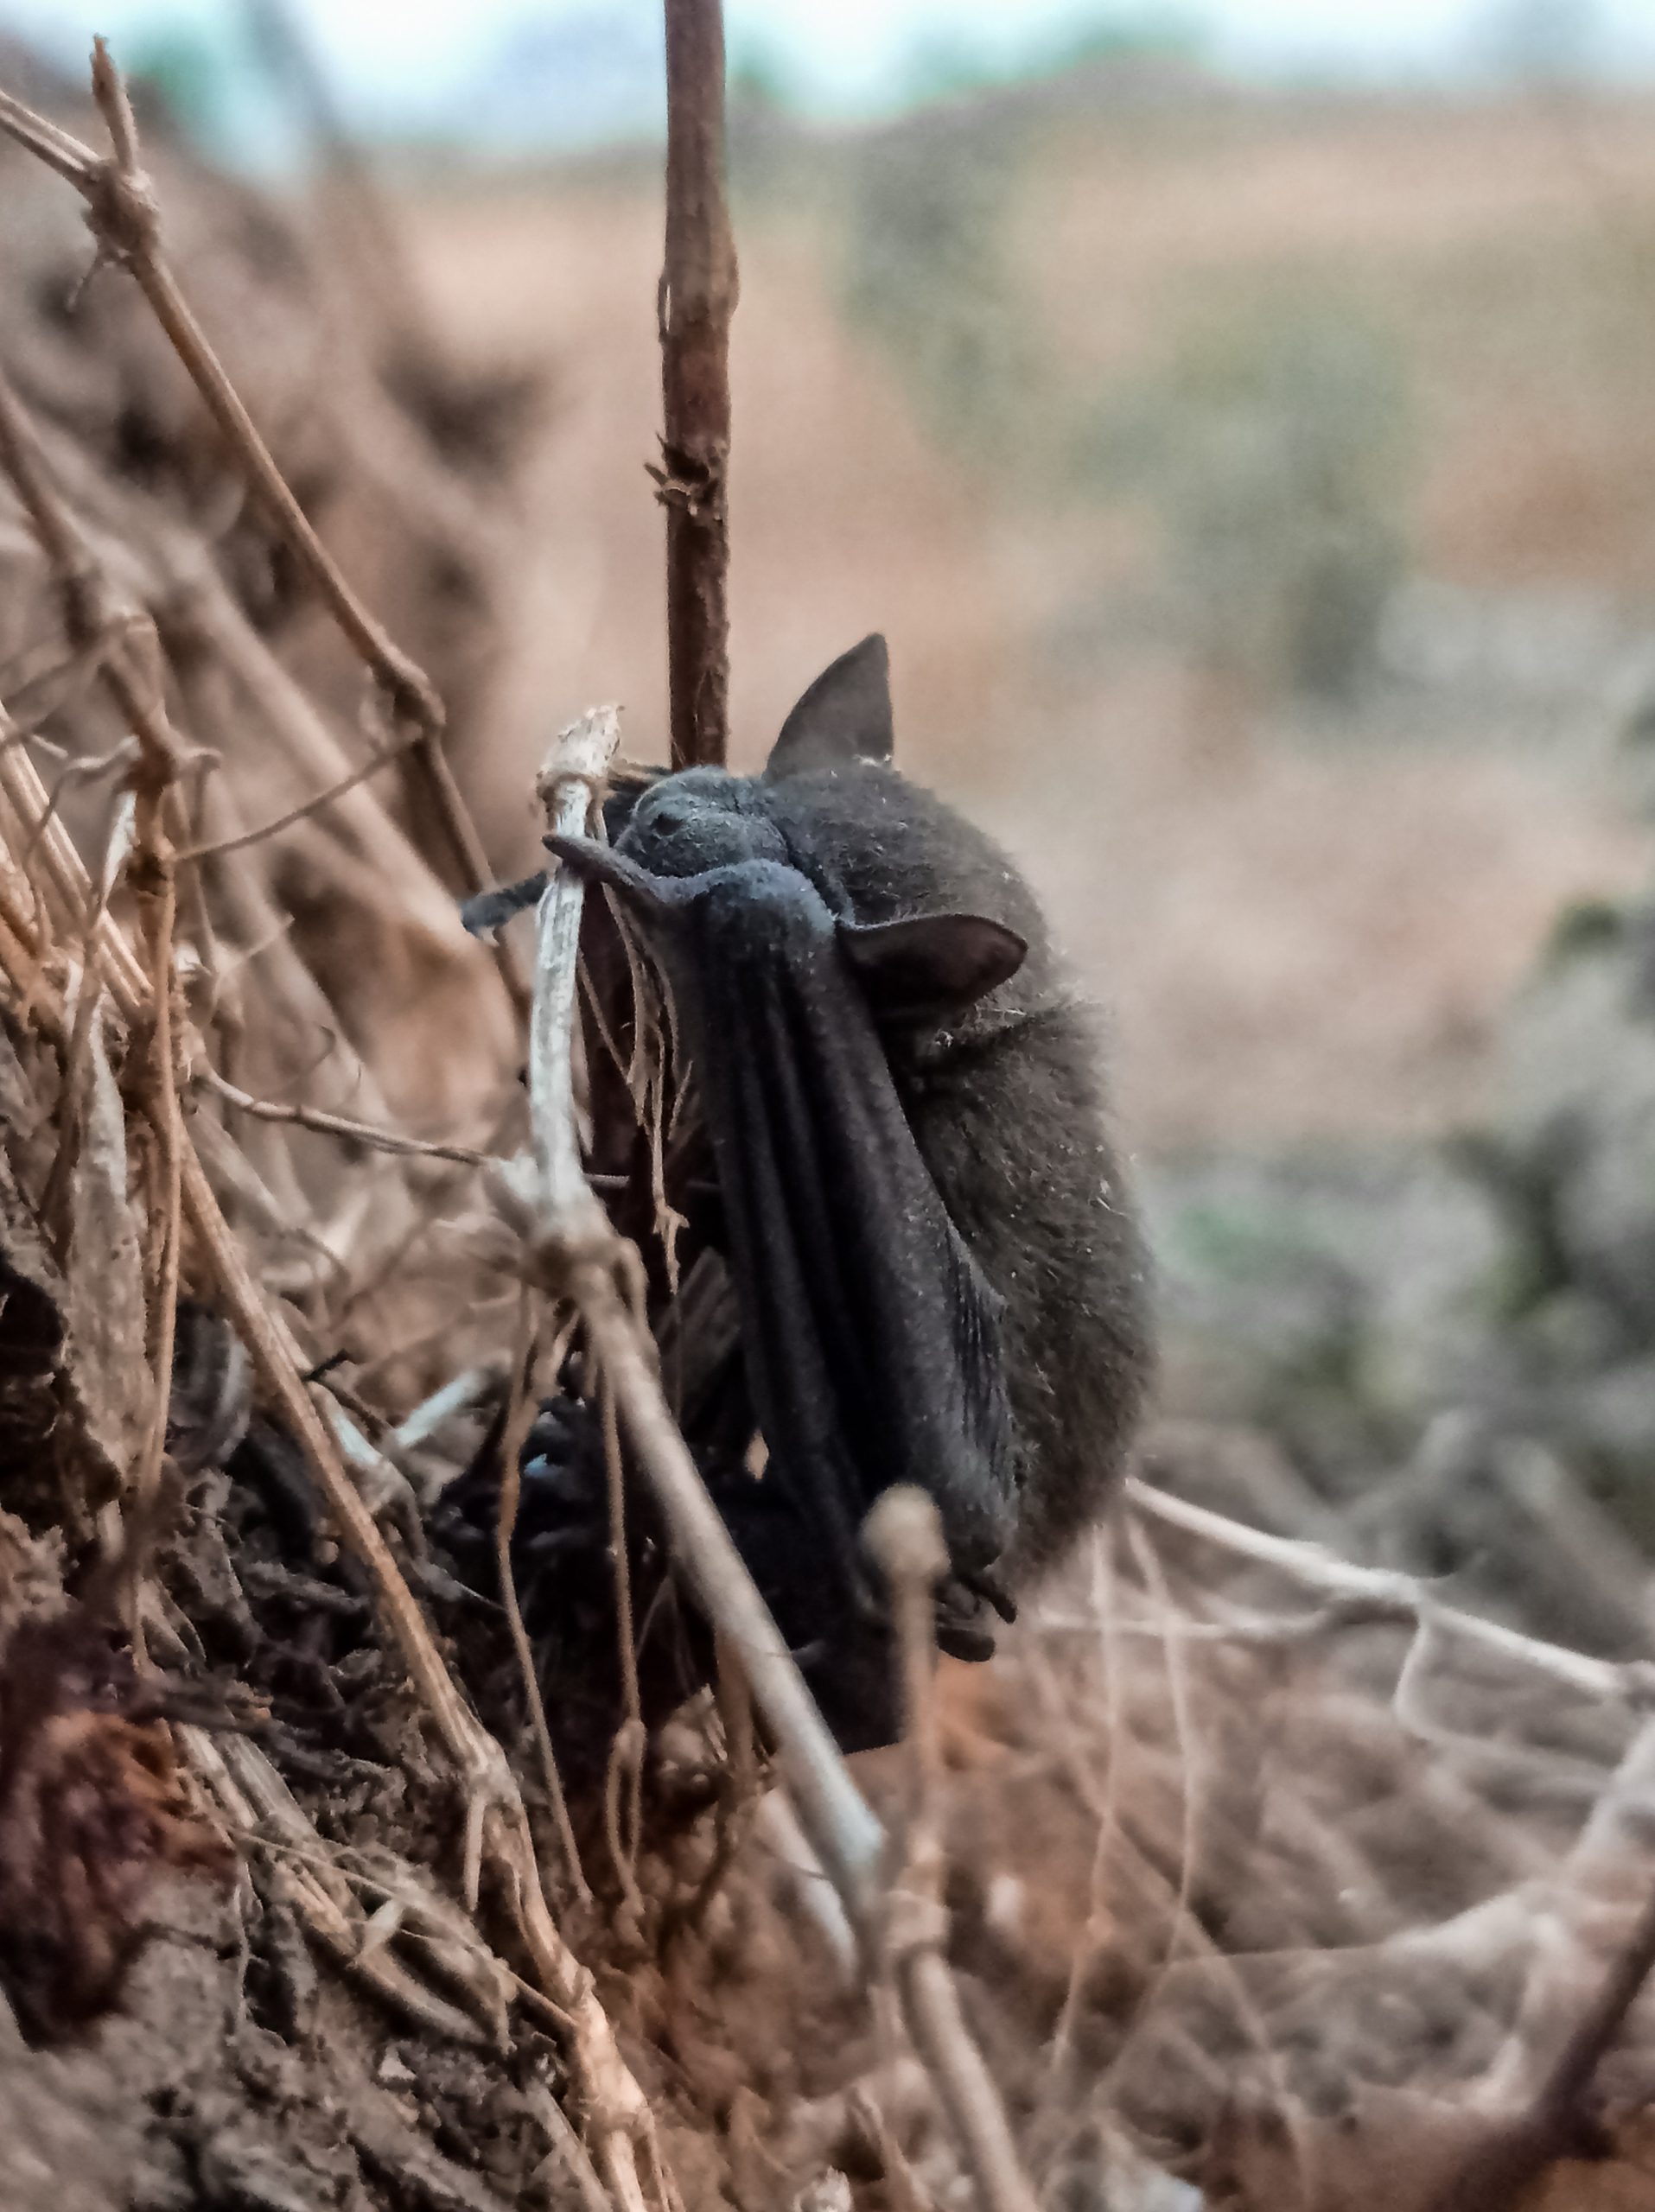 Bat in the dry plants